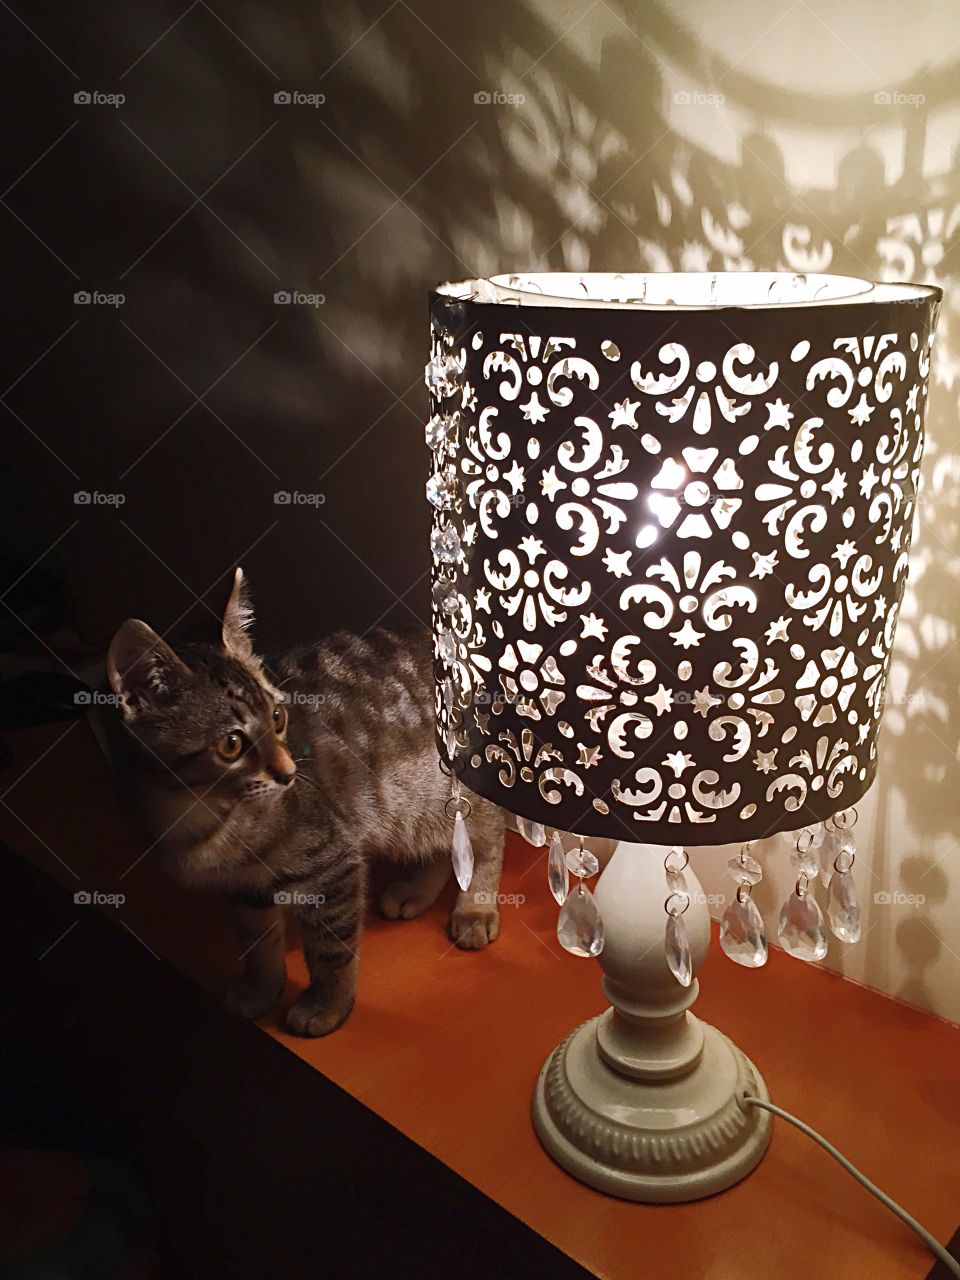 Kitten is playing with a lamp